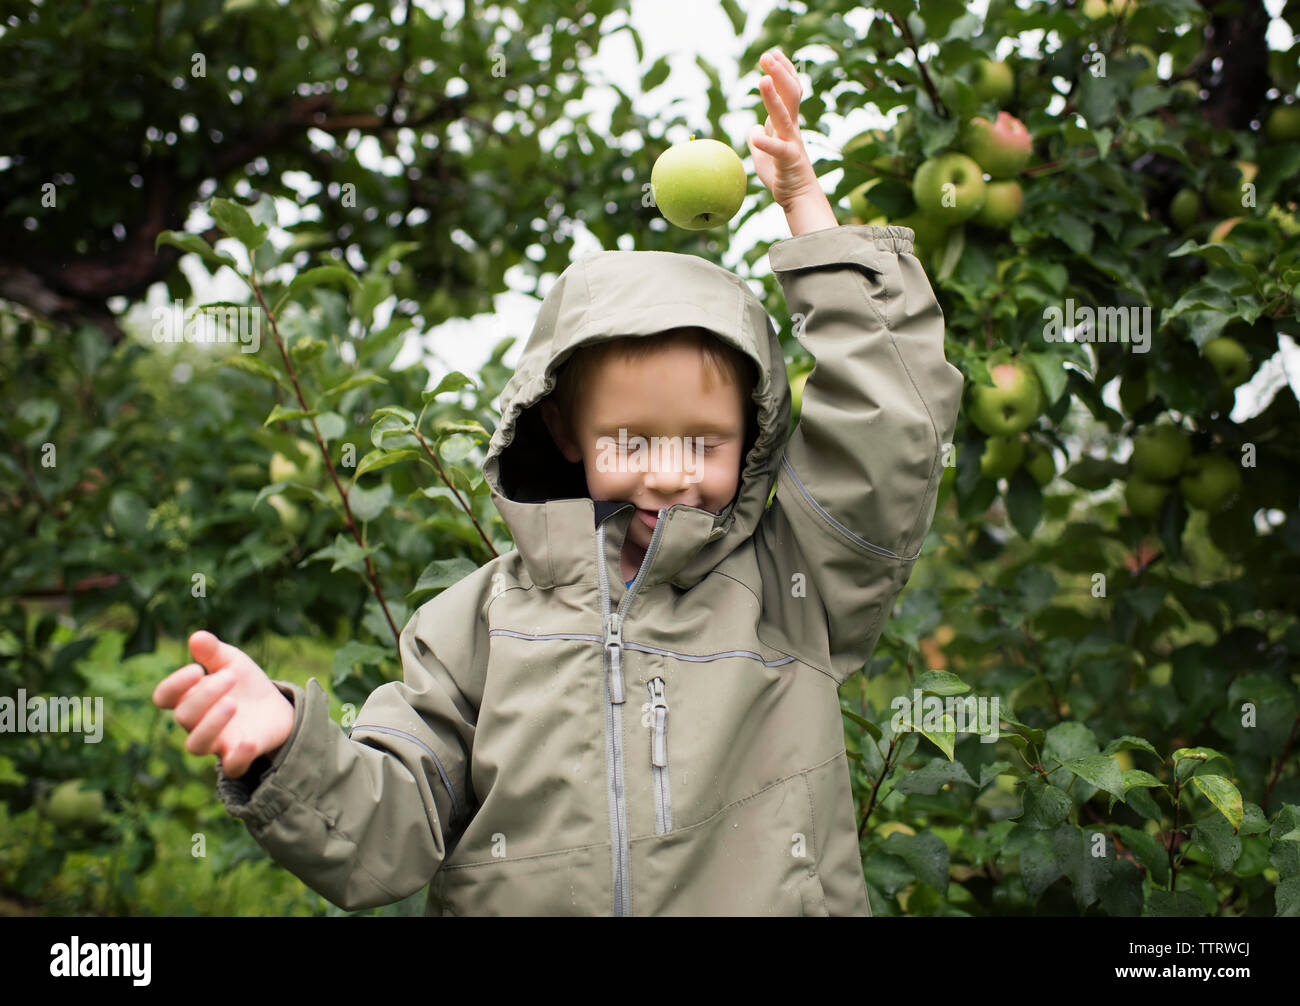 Playful boy wearing raincoat dropping apple on head against fruit trees at orchard Stock Photo